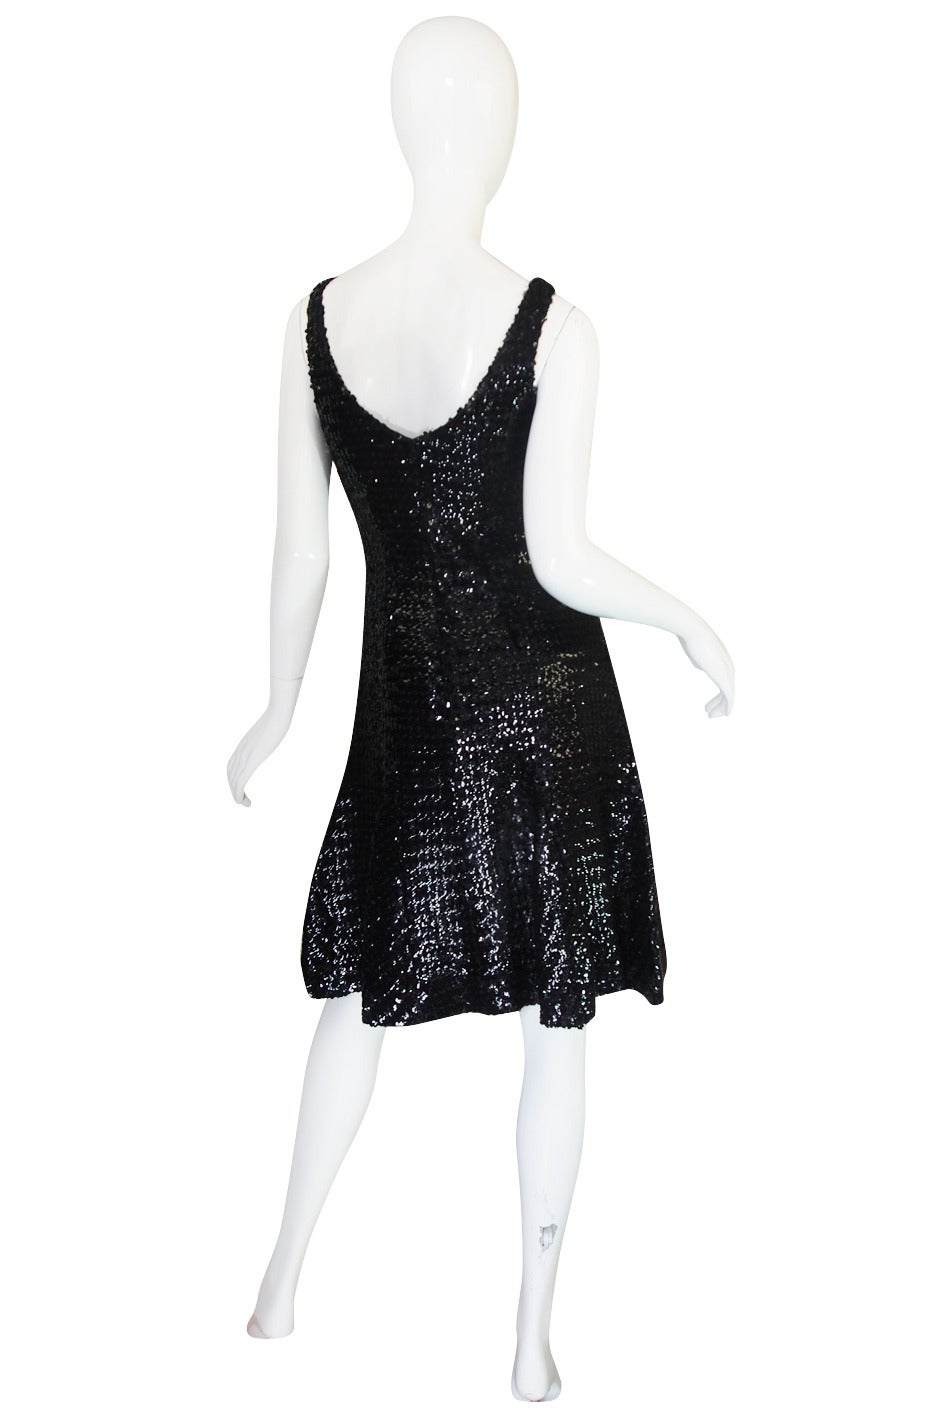 A very fine and fabulous sequin wiggle dress by Donald Brooks that I just adore. If you love it in the photos you will love it even more when you actually get to see the level of construction and work that would have been done to so densely hand